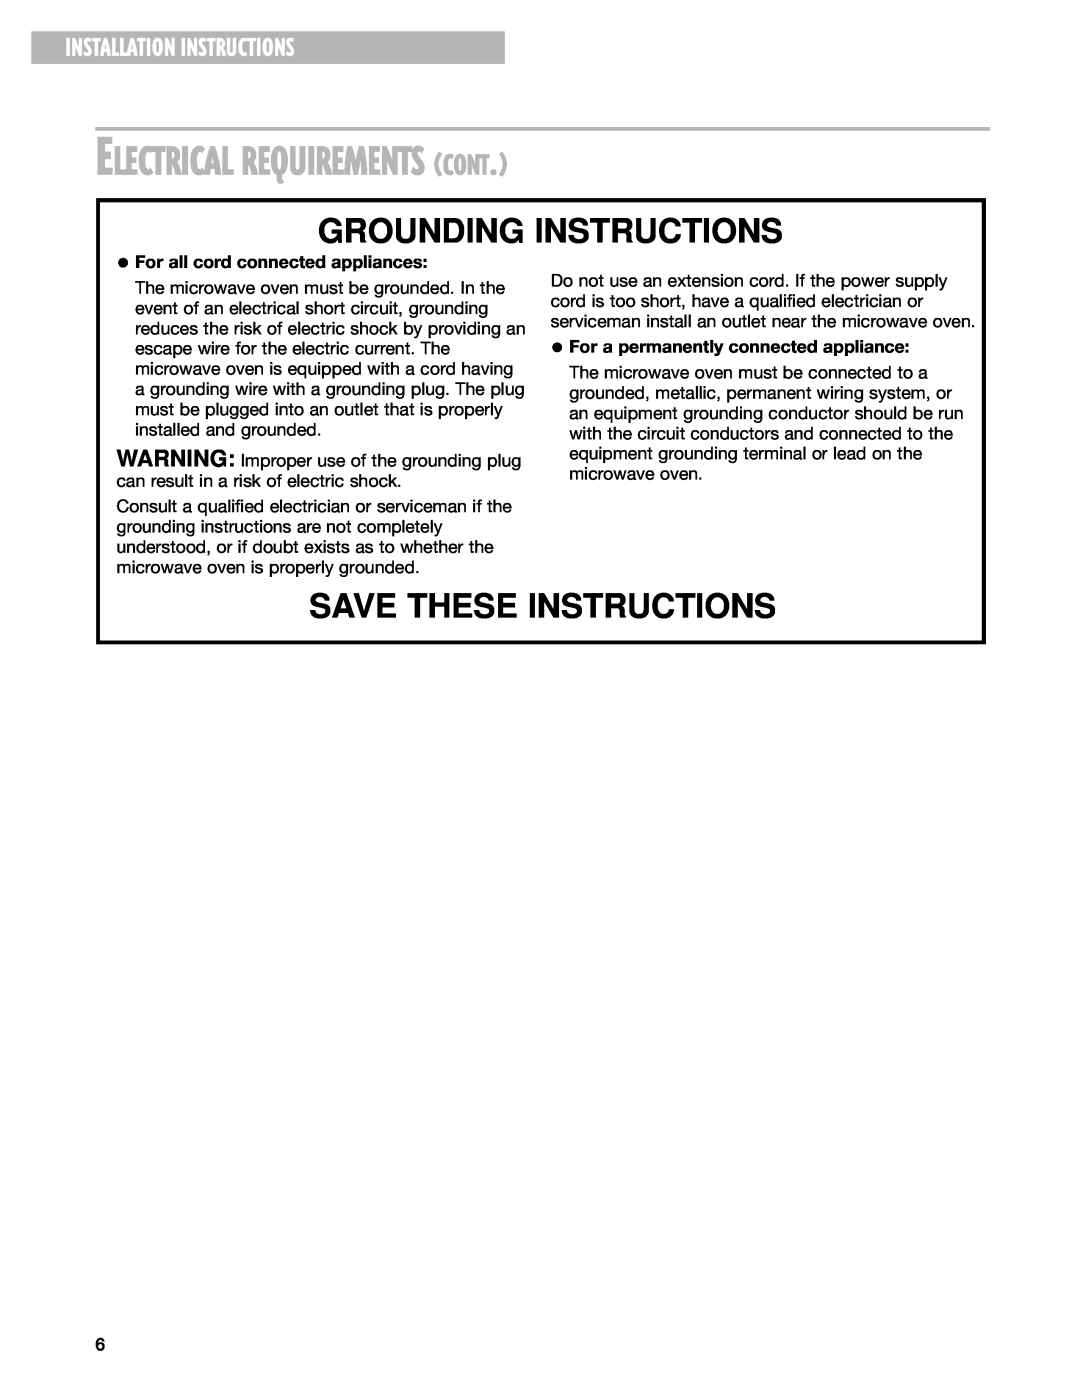 Whirlpool MT4140SK, MT4210SK Electrical Requirements Cont, Grounding Instructions, Installation Instructions 